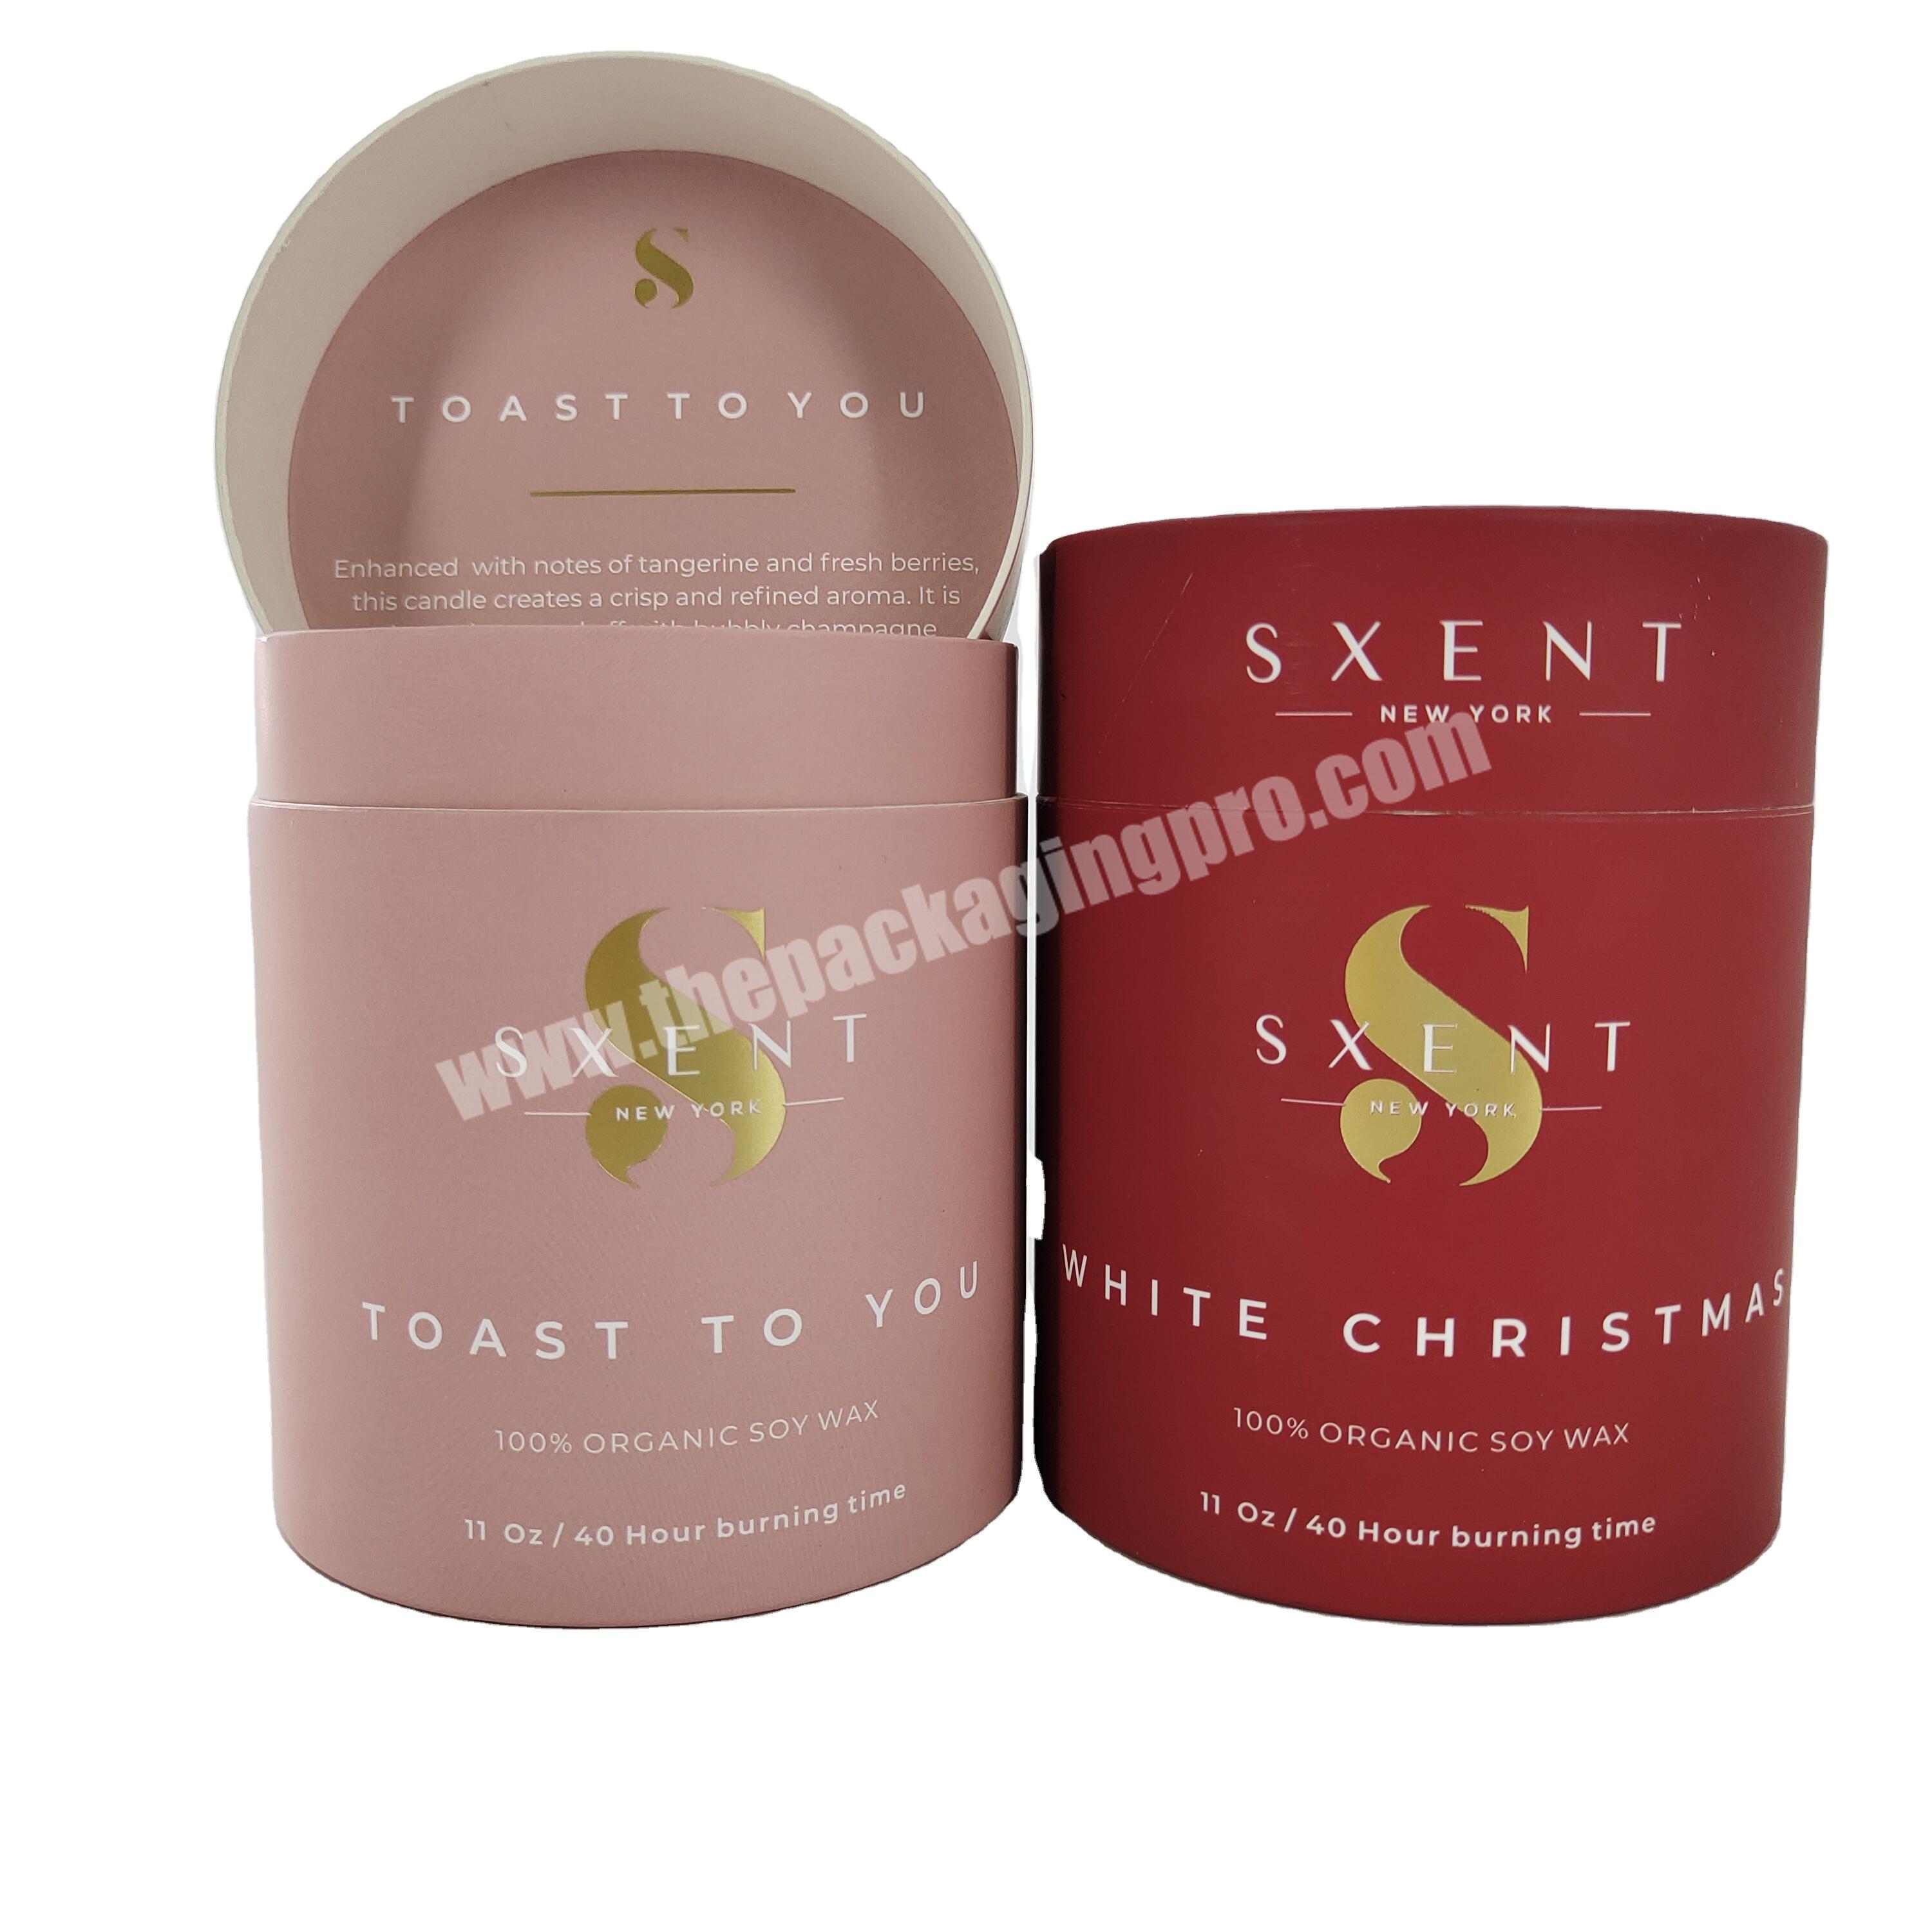 eco friendly soft touch packaging box for glass candle box packaging